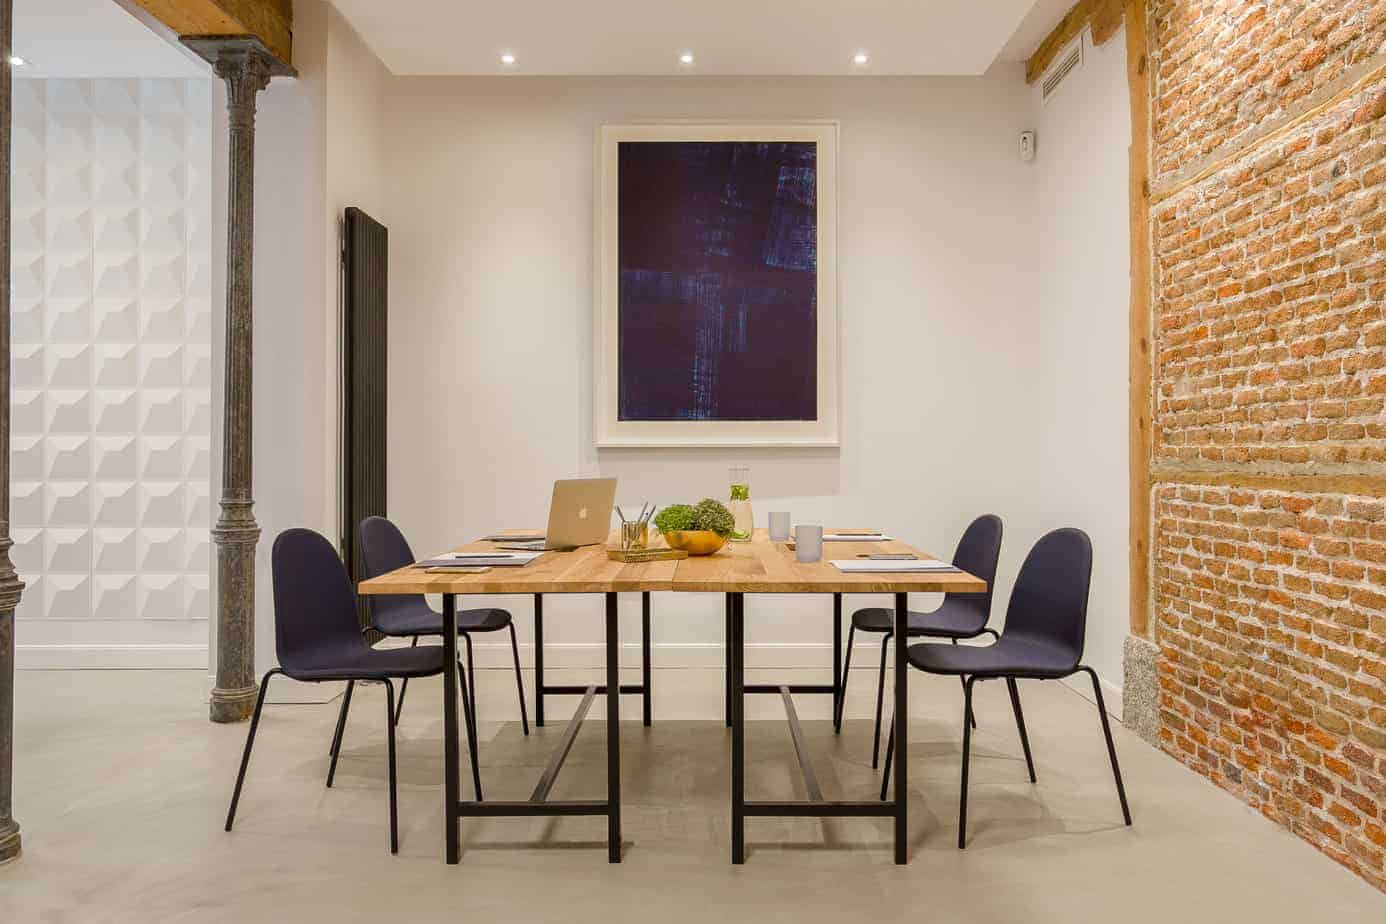 Stylish meeting space with brick walls